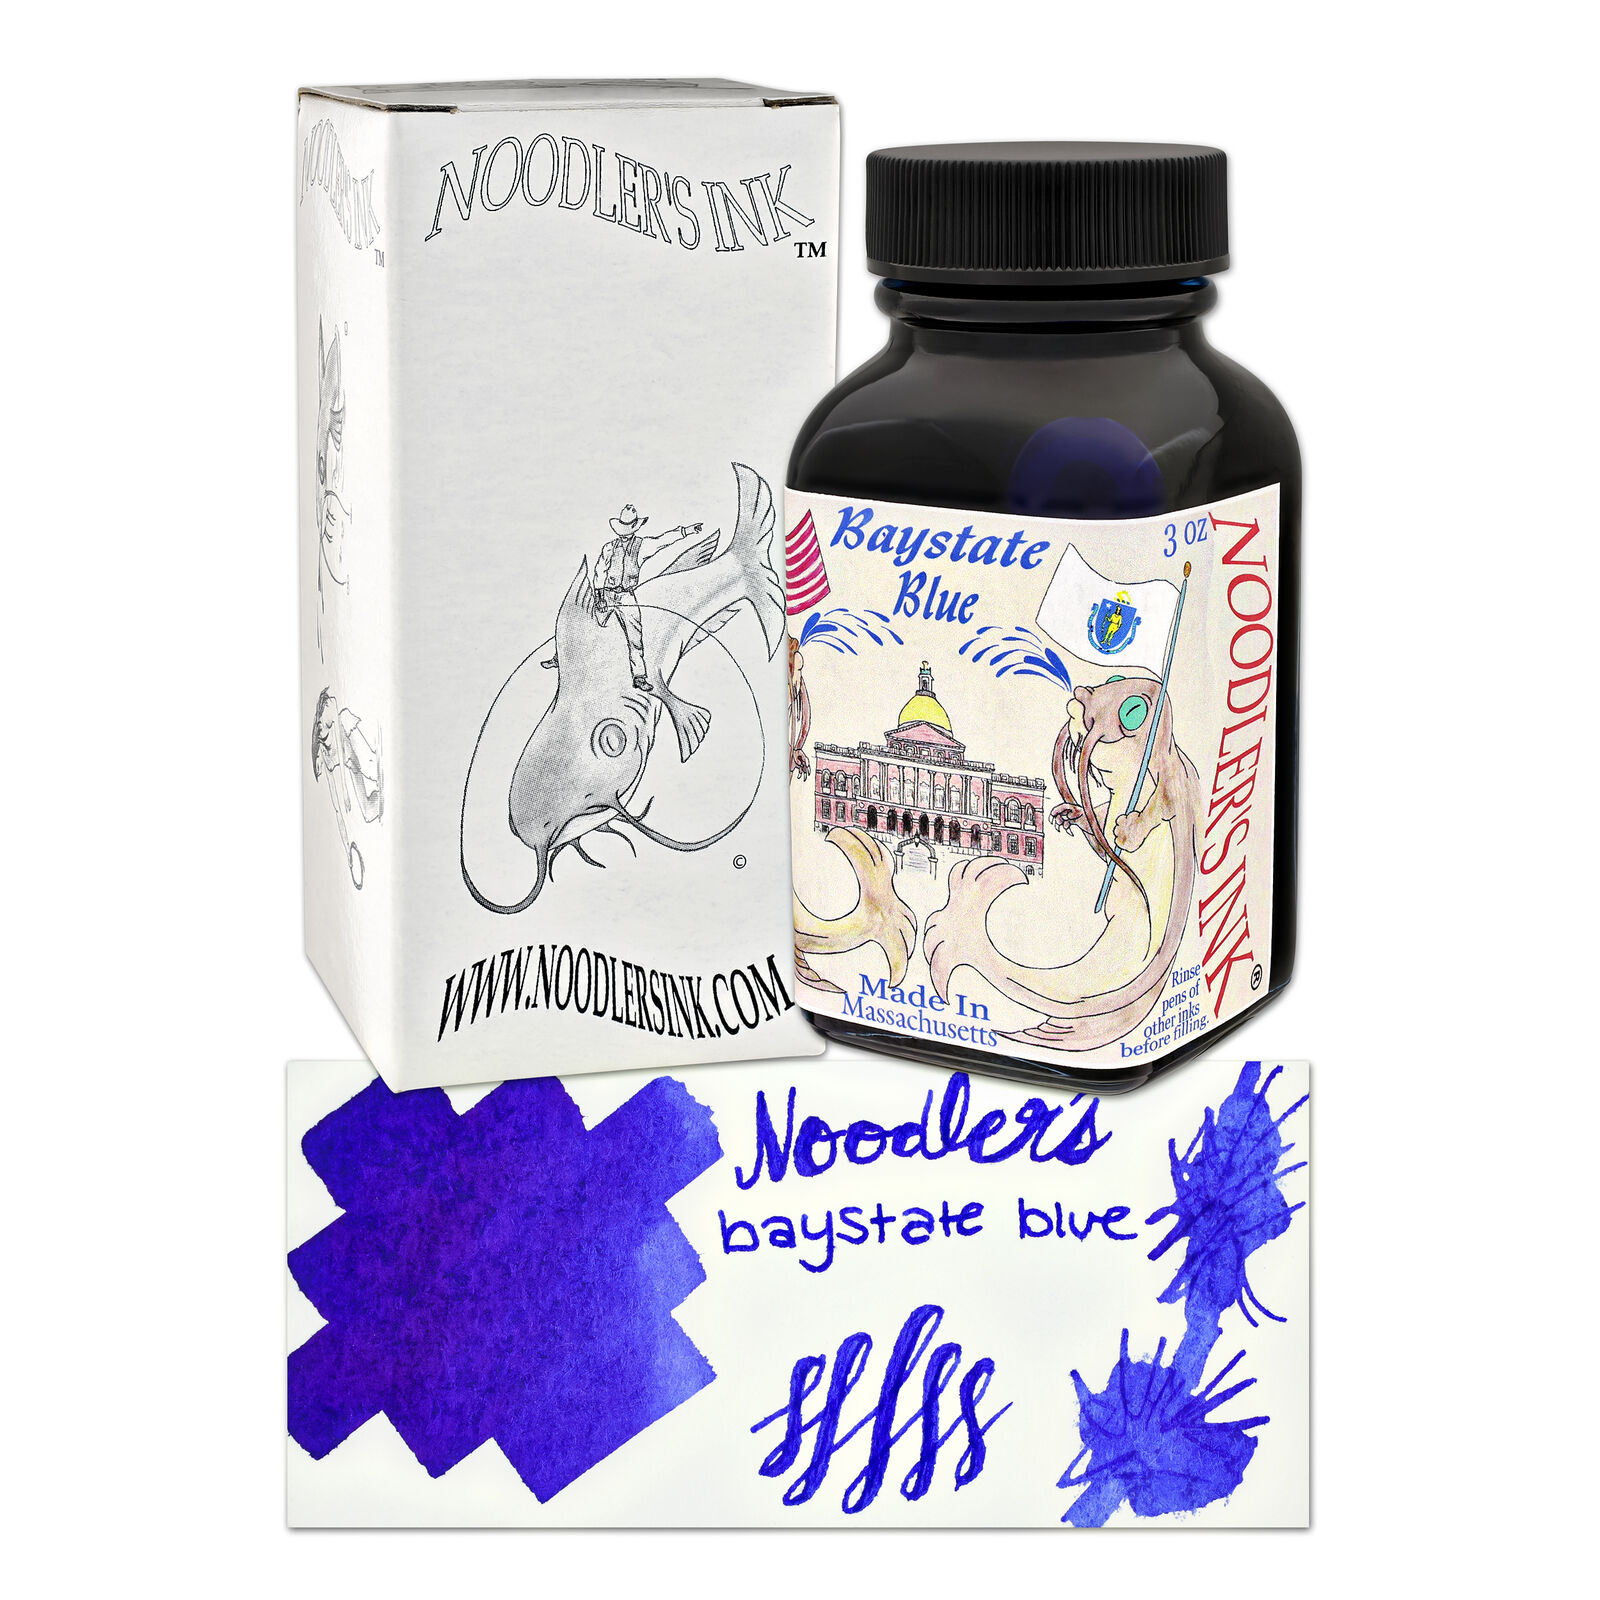 Noodler's Baystate Bottled Ink for Fountain Pens in Blue - 3oz - NEW in Box